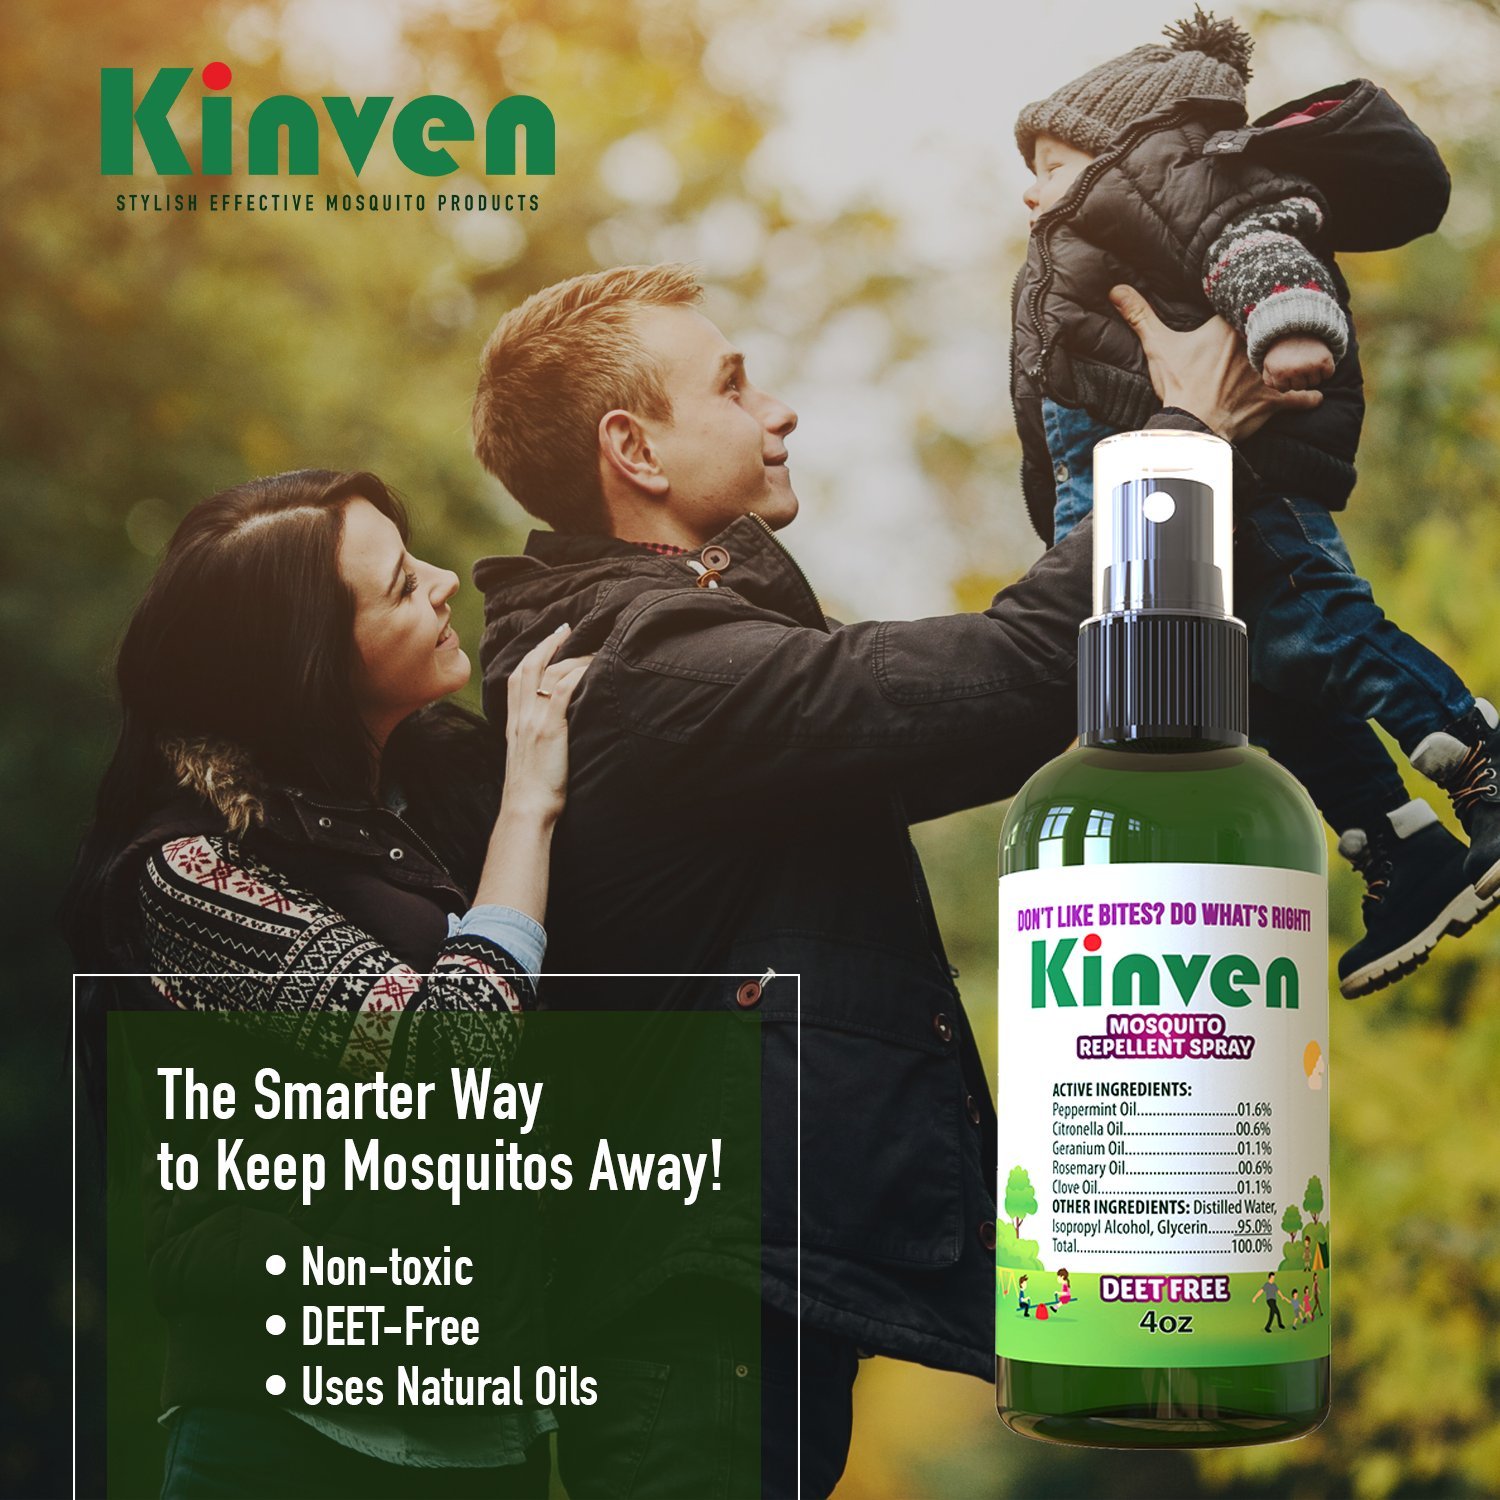 Kinven Mosquito Repellent Spray for Kids & Adults, Safe, Non-Toxic, DEET-Free, Long-Lasting Anti-Mosquito Bite Protection, with Natural Oils, 1oz - image 2 of 3